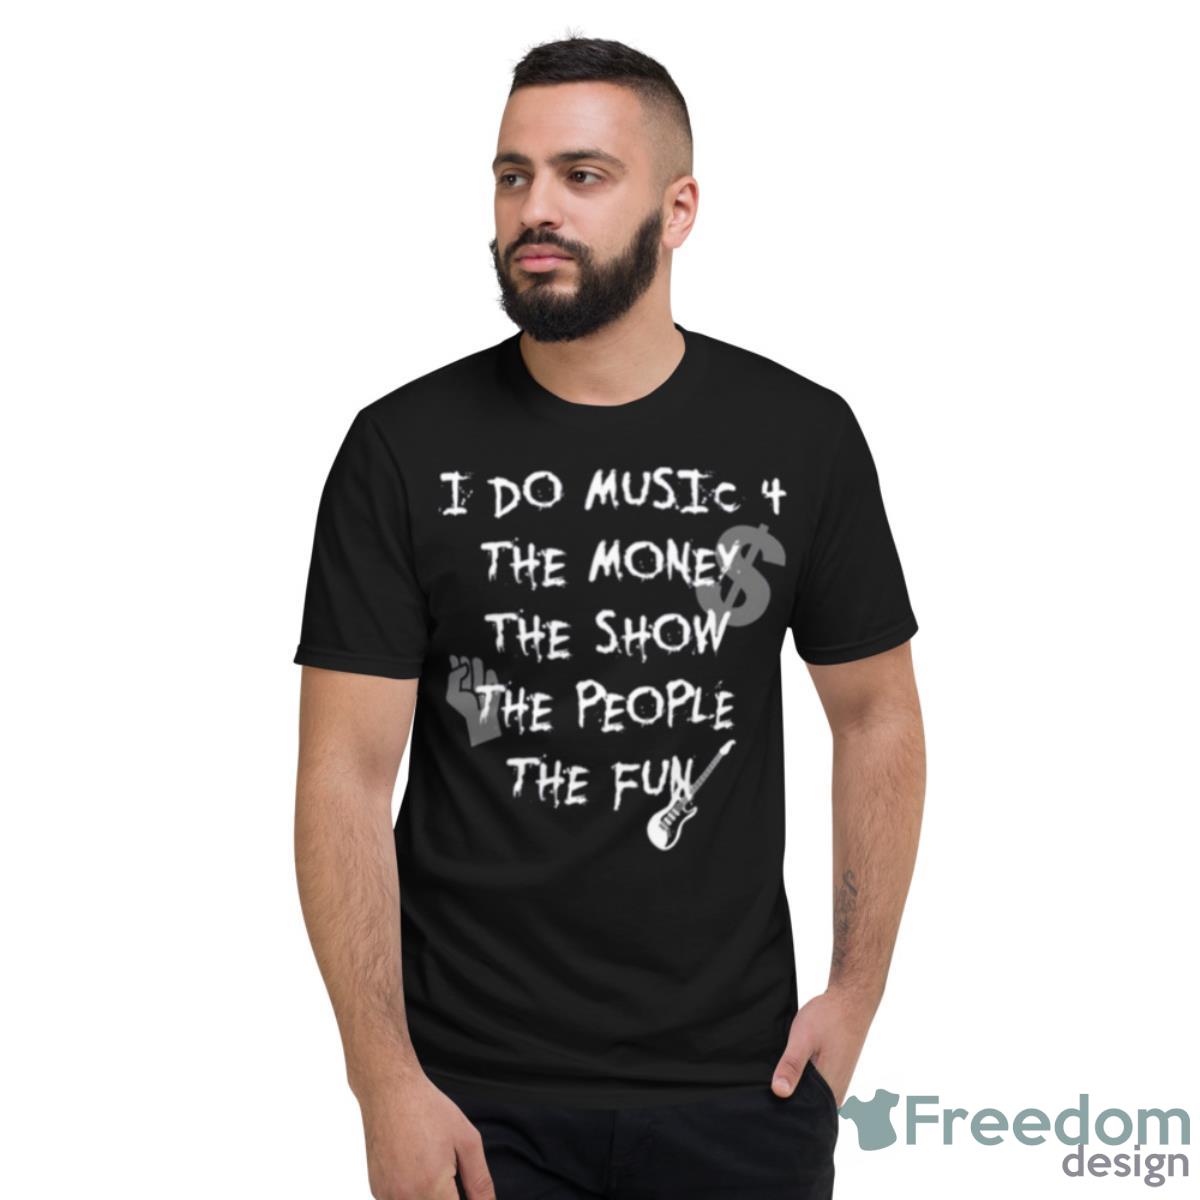 The Real Reason For Music Shirt